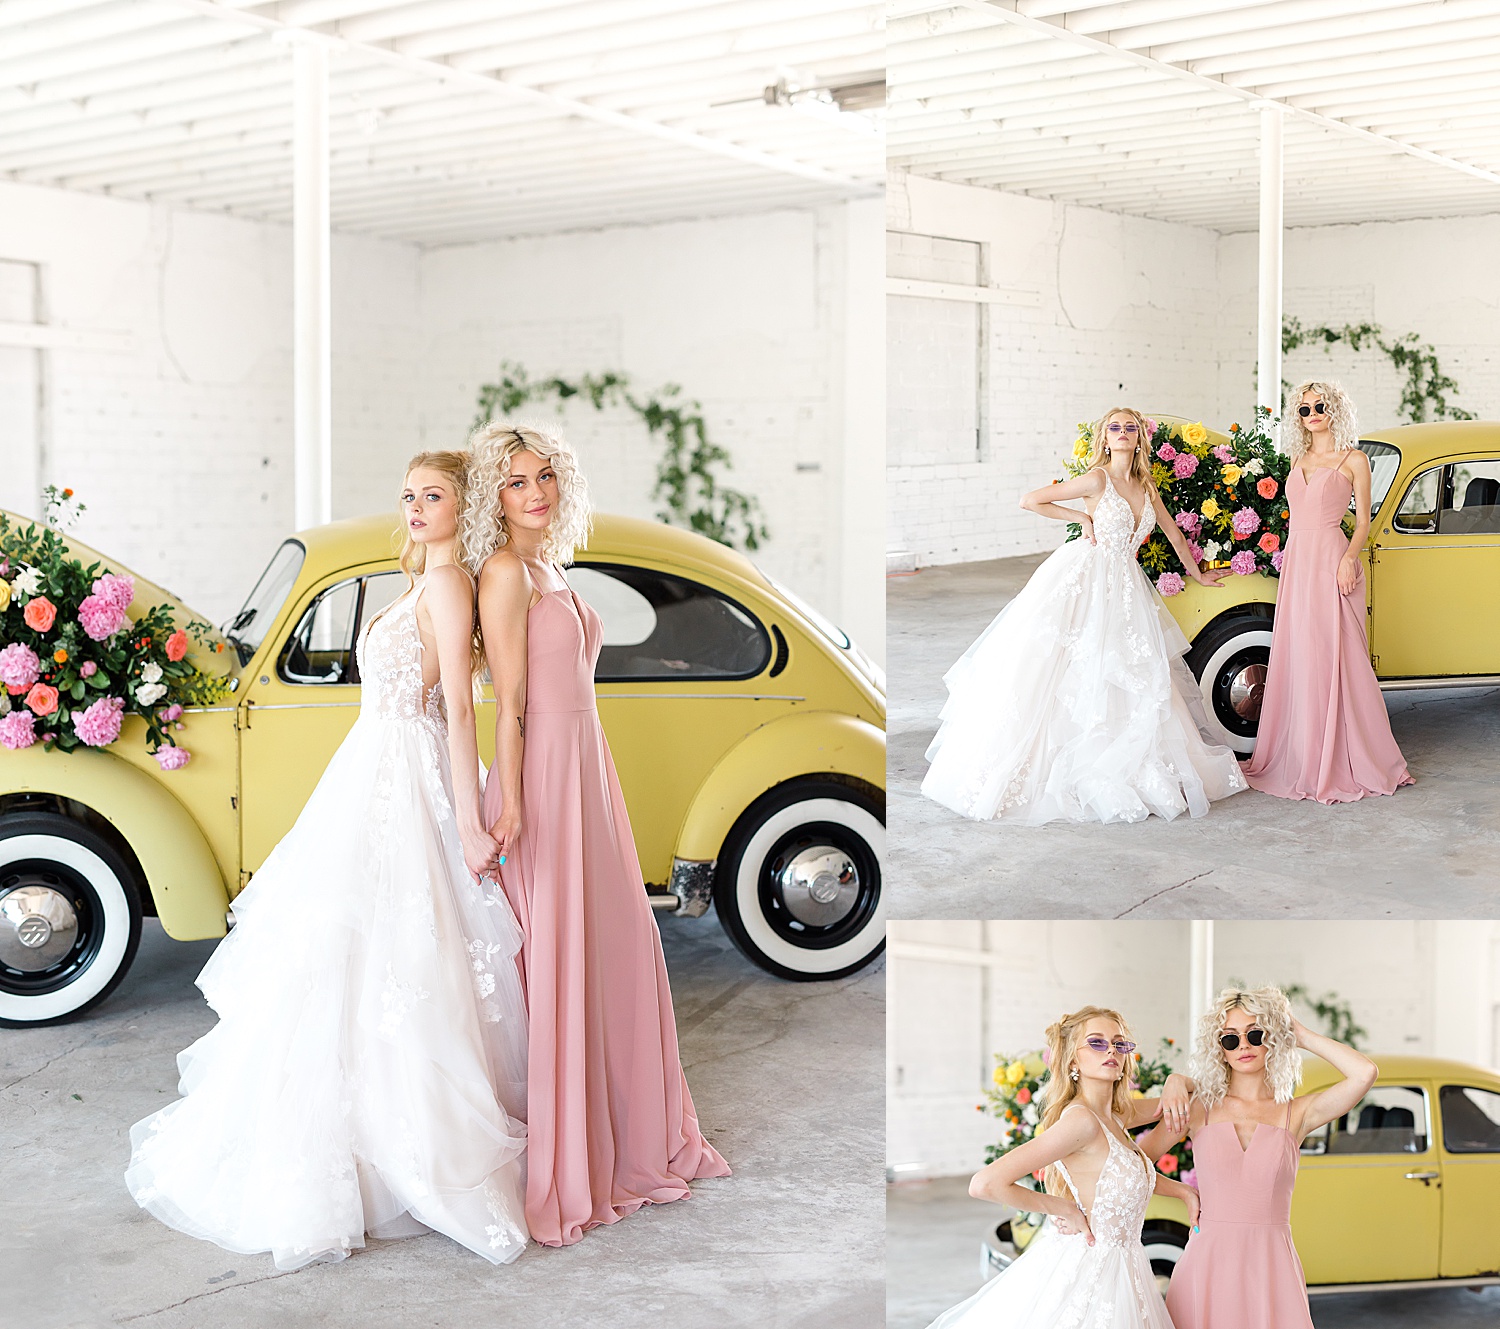 Bride and bridesmaids in front of yellow car by North Dakota photographer Fernweh & Liebe 